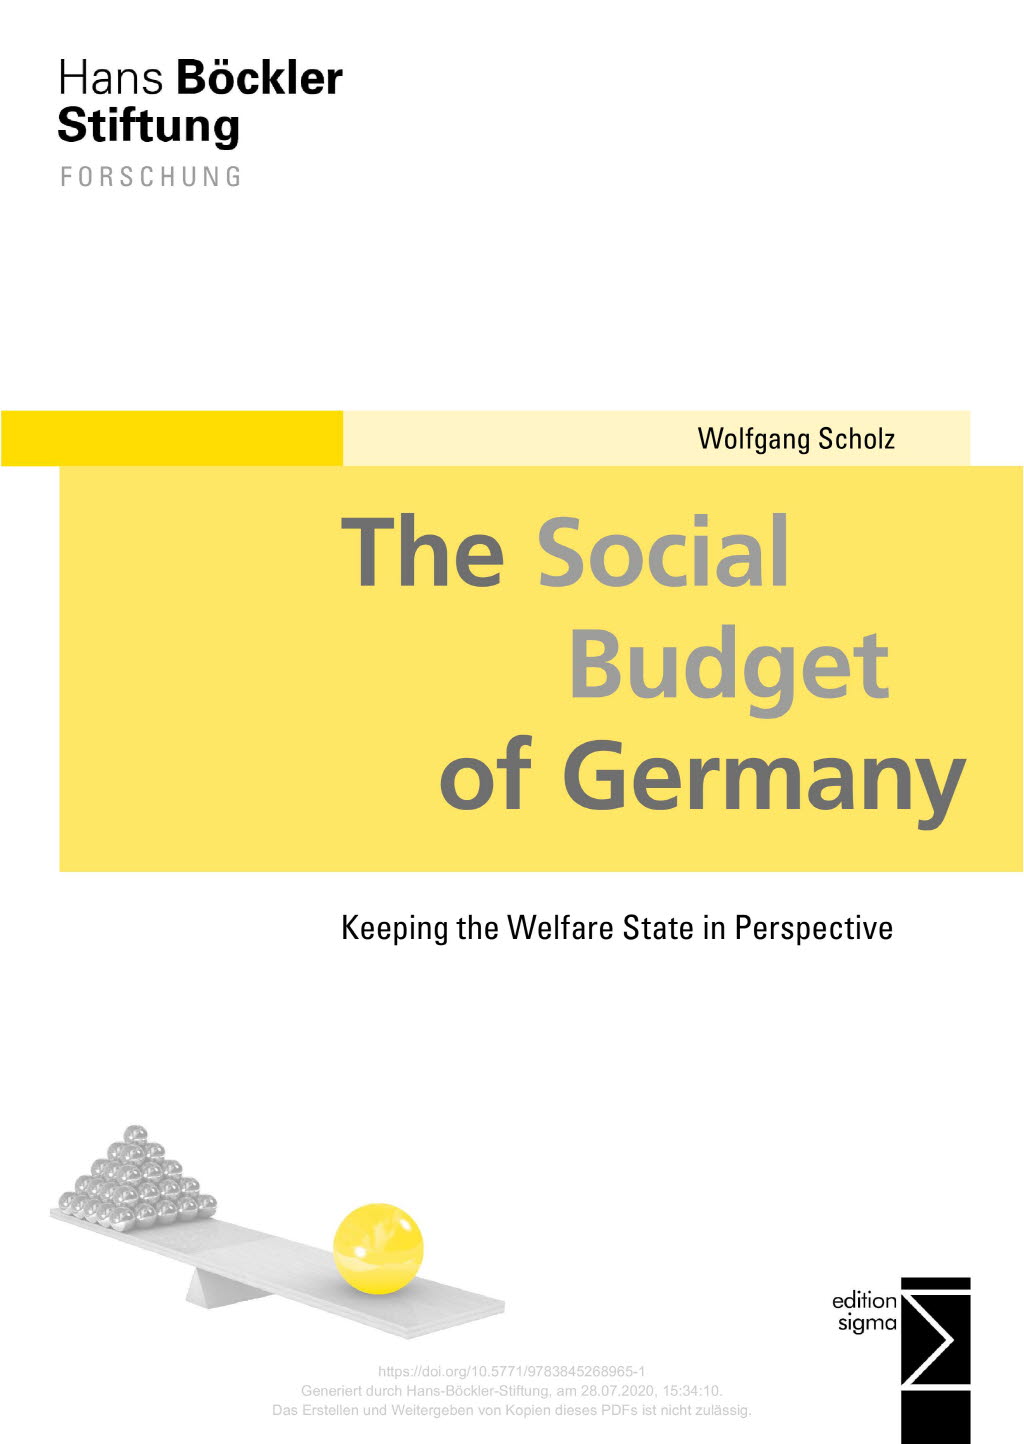 The Social Budget of Germany